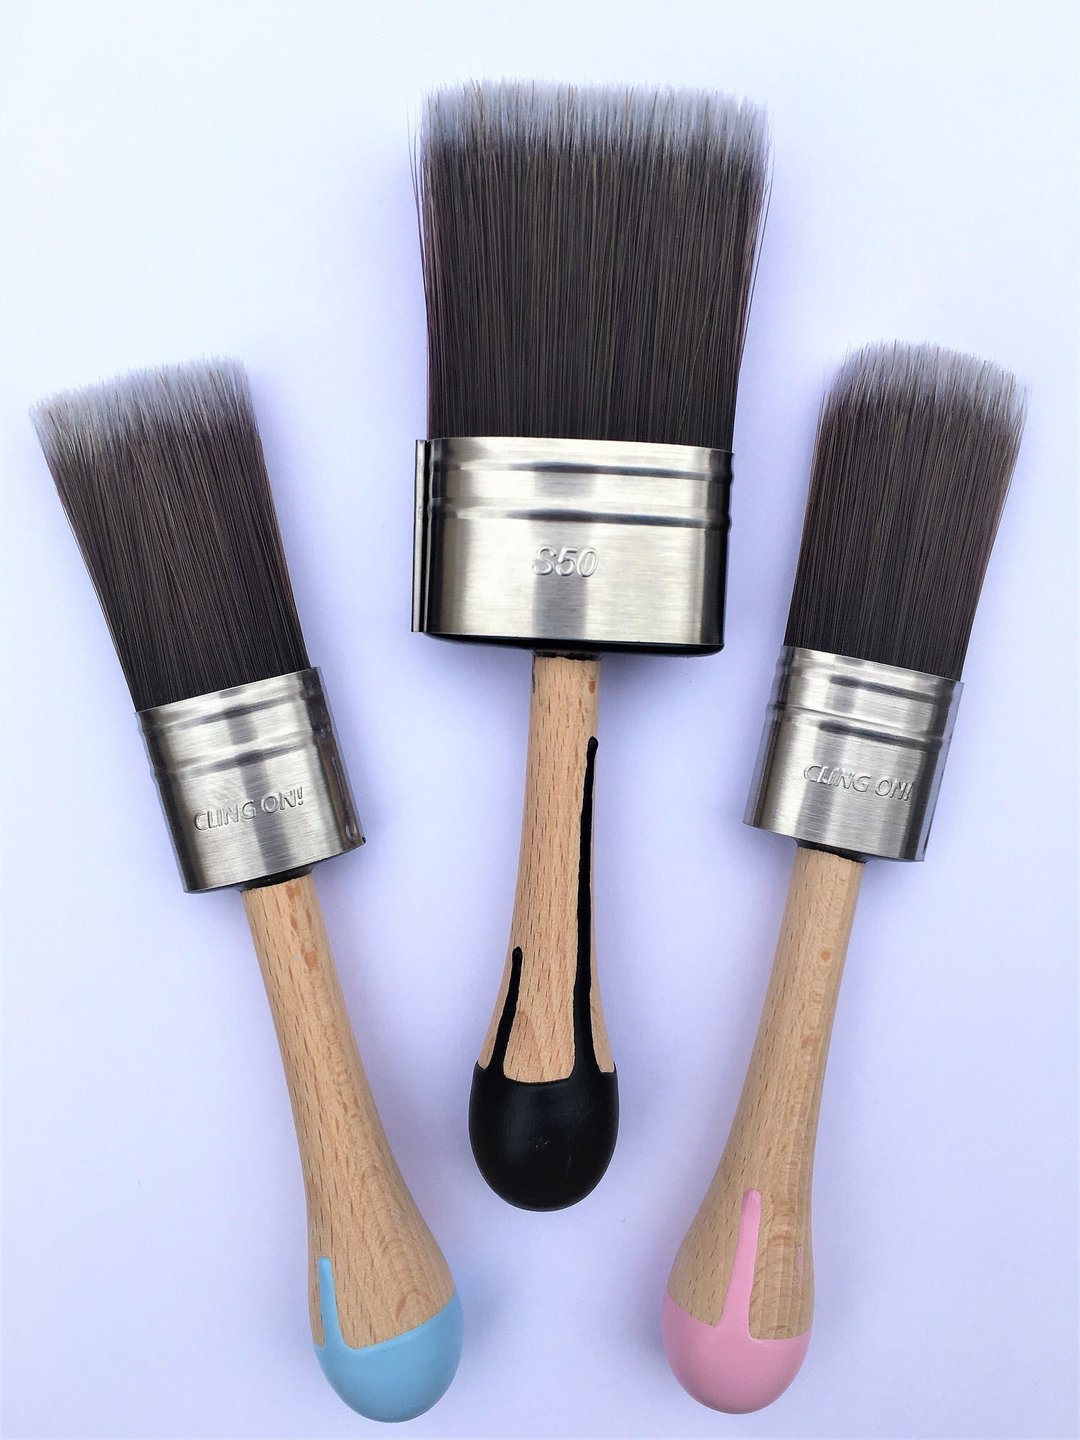 R14 Round Small Paint Brush Cling on Synthetic Paintbrush 